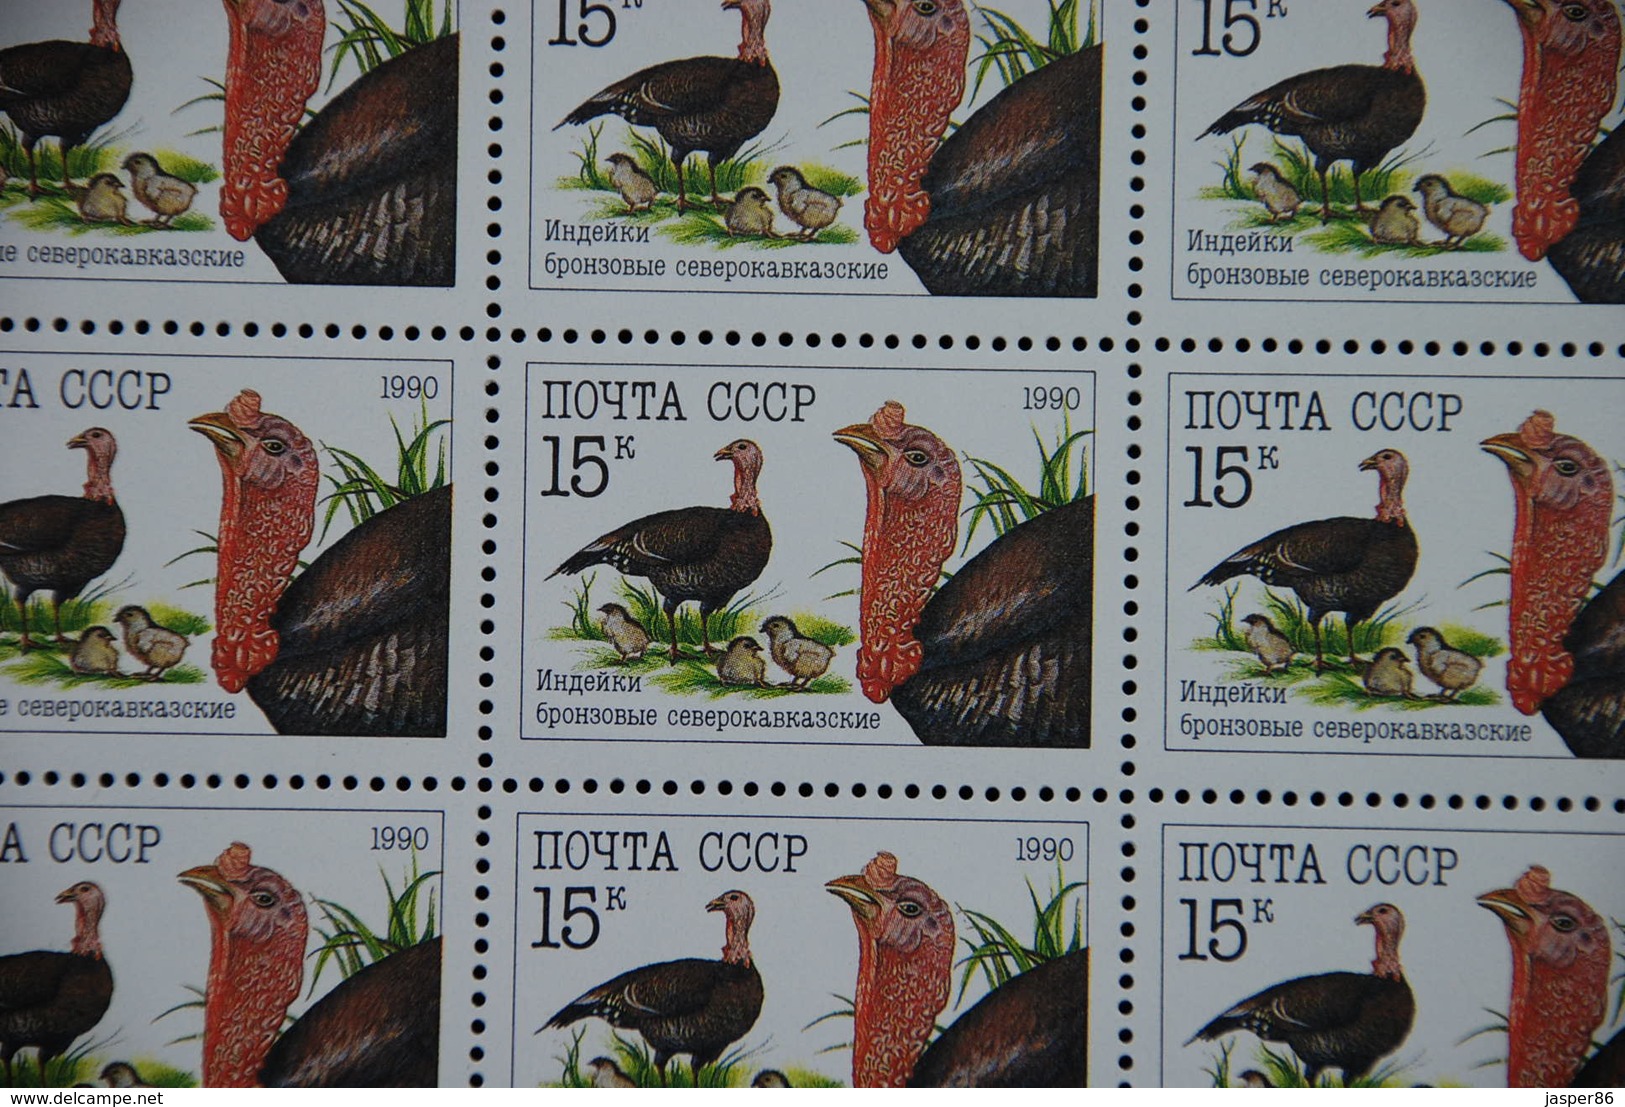 RUSSIA 1990 MNH Sc 5909-5911, Mi 6102-6104 Geese, Rooster, Turkey CV40.00 - Full Sheets